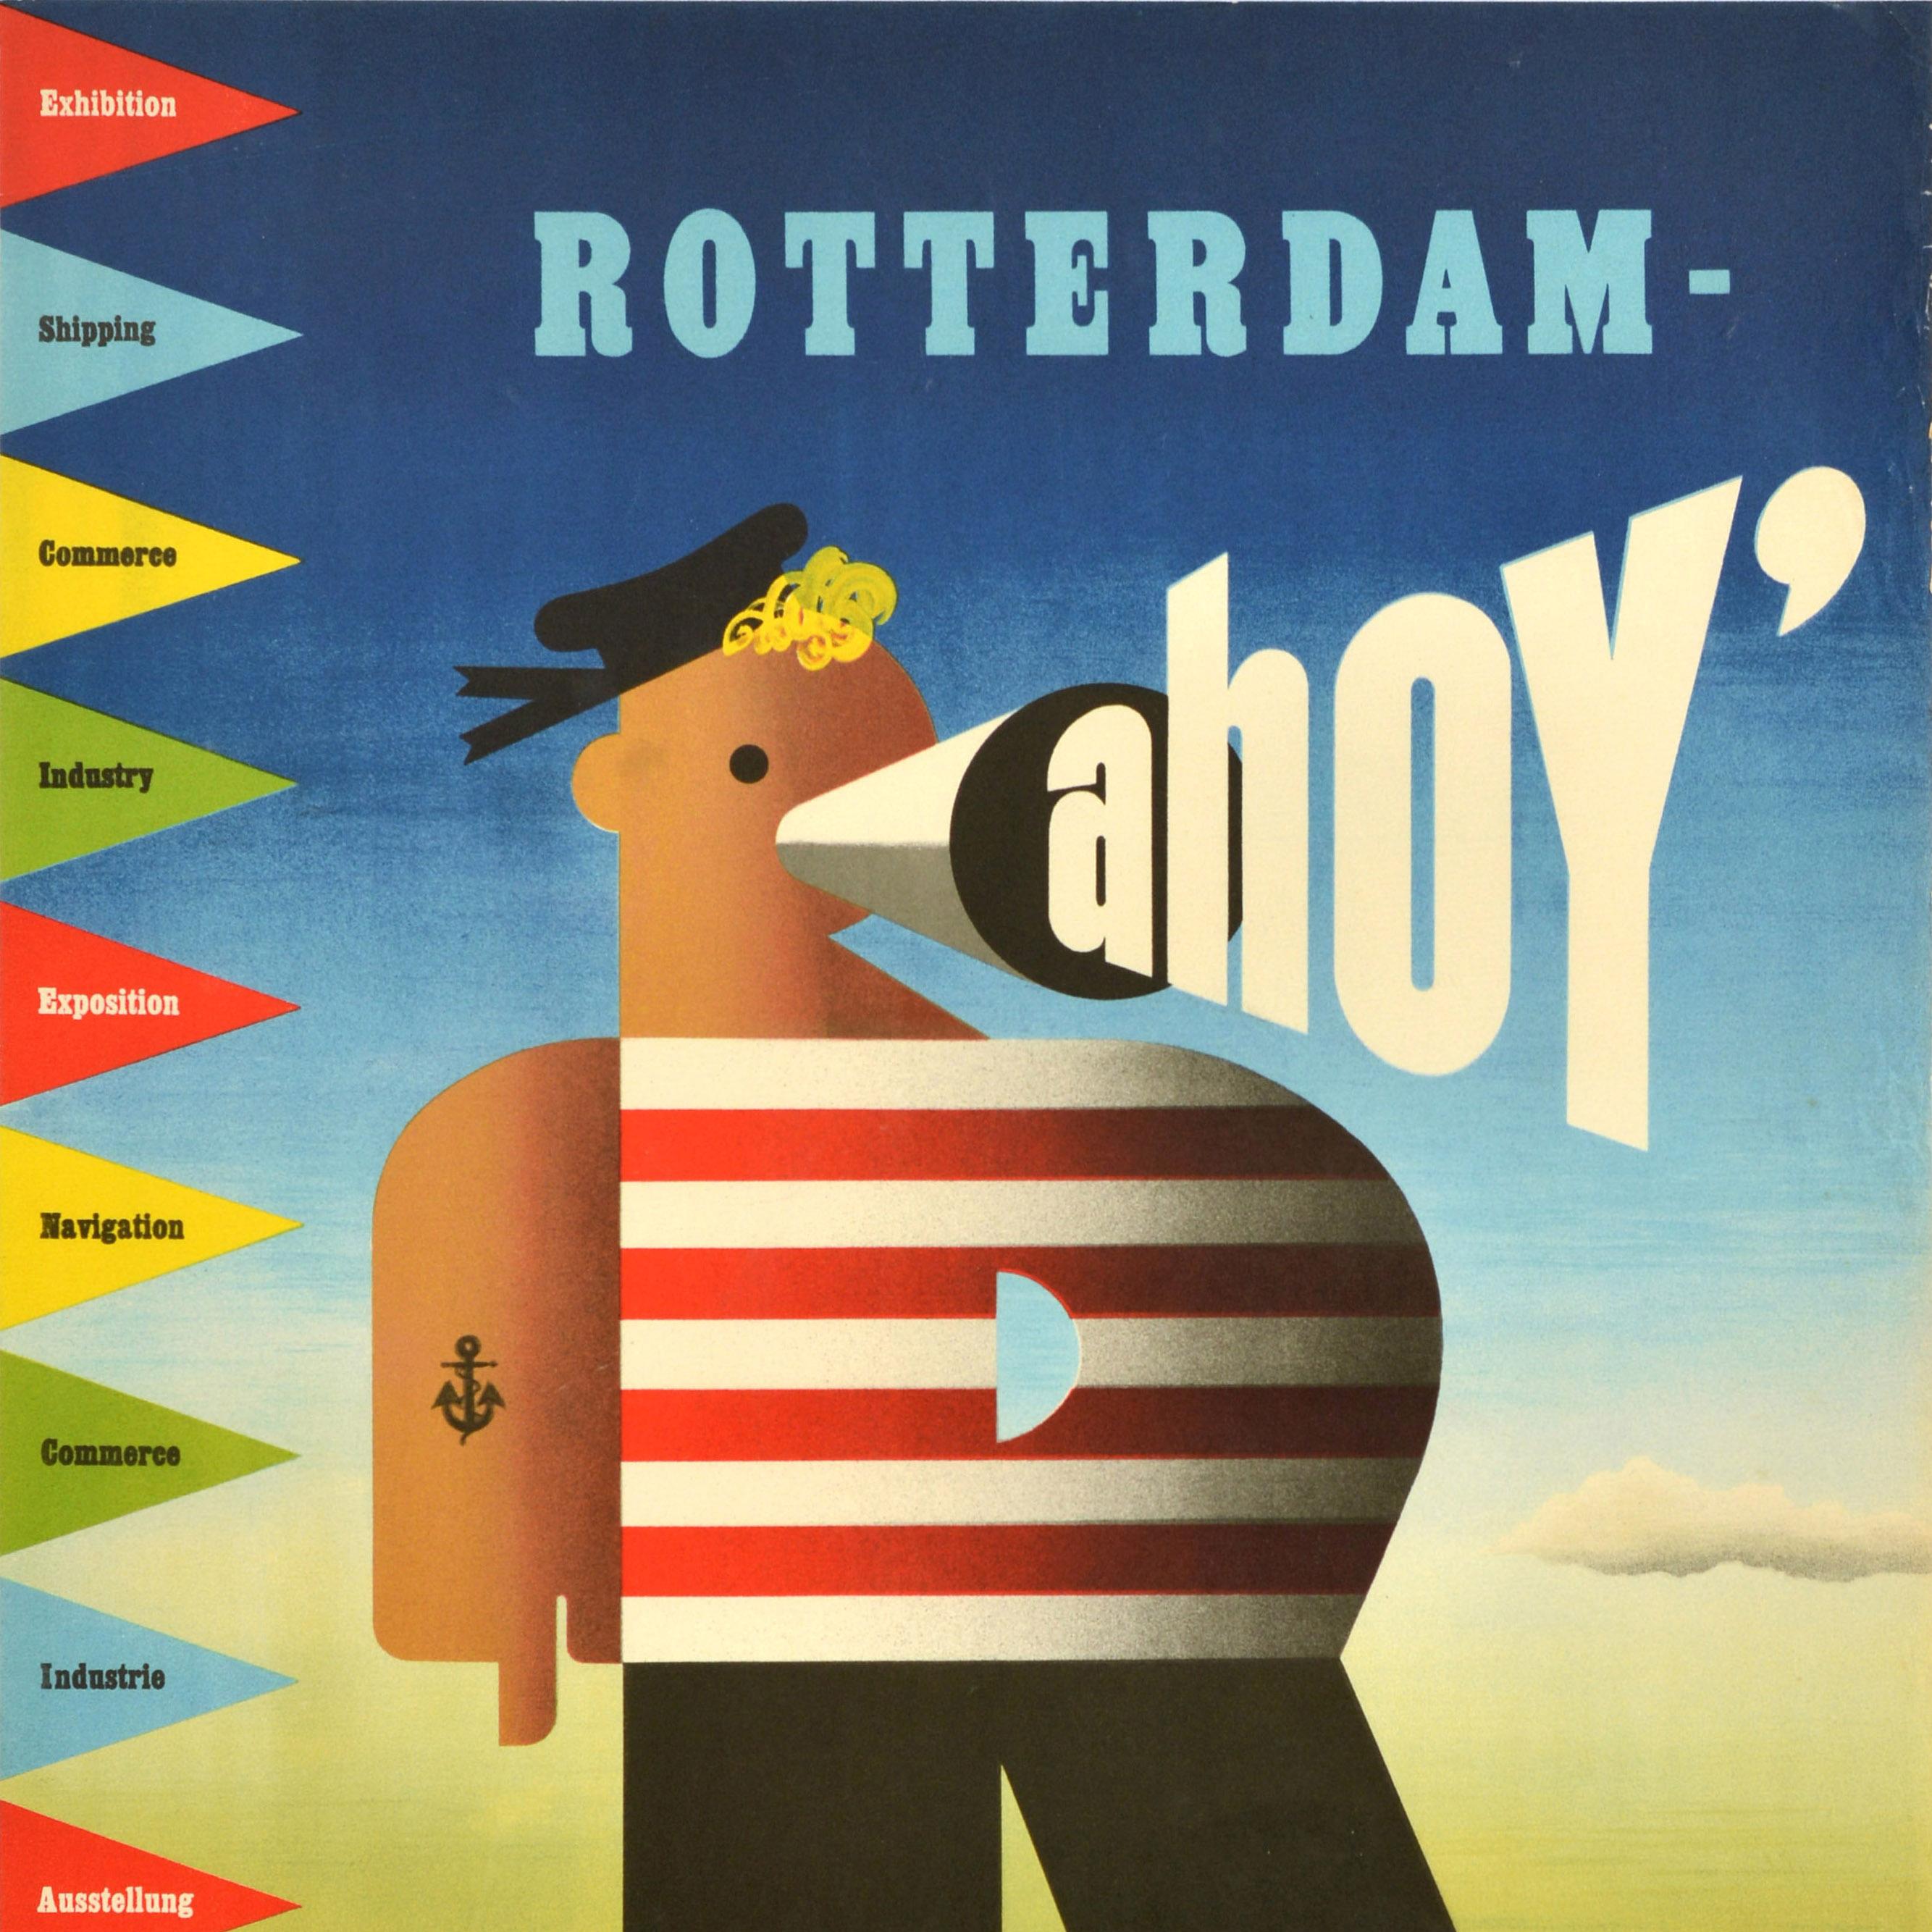 Original vintage mid-century design advertising poster for the Rotterdam Rhineport Reconstructed Haven Tentoonstelling Haven Festival held from 15 June to 15 August featuring a fun nautical illustration of a sailor in a hat with an anchor tattoo on